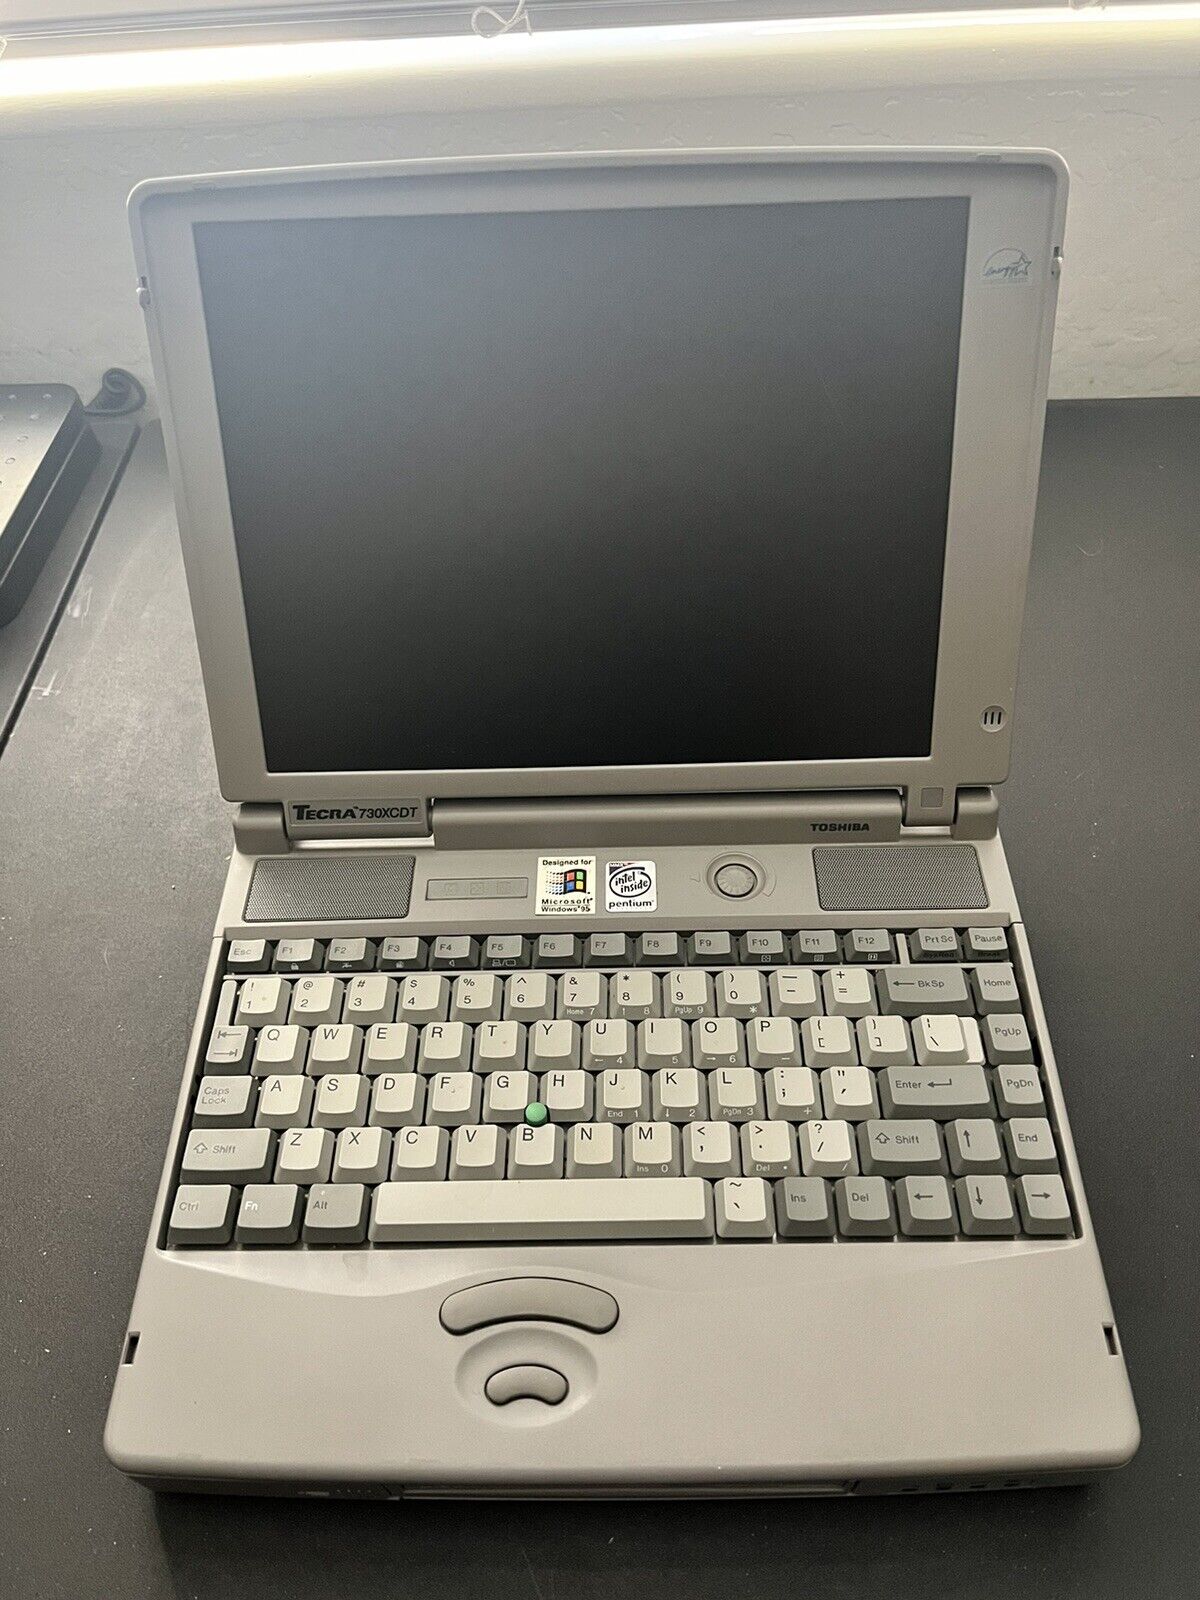 Toshiba Notebook - PA1238UT2C Tecra 730 XCDT. SOLD AS IS